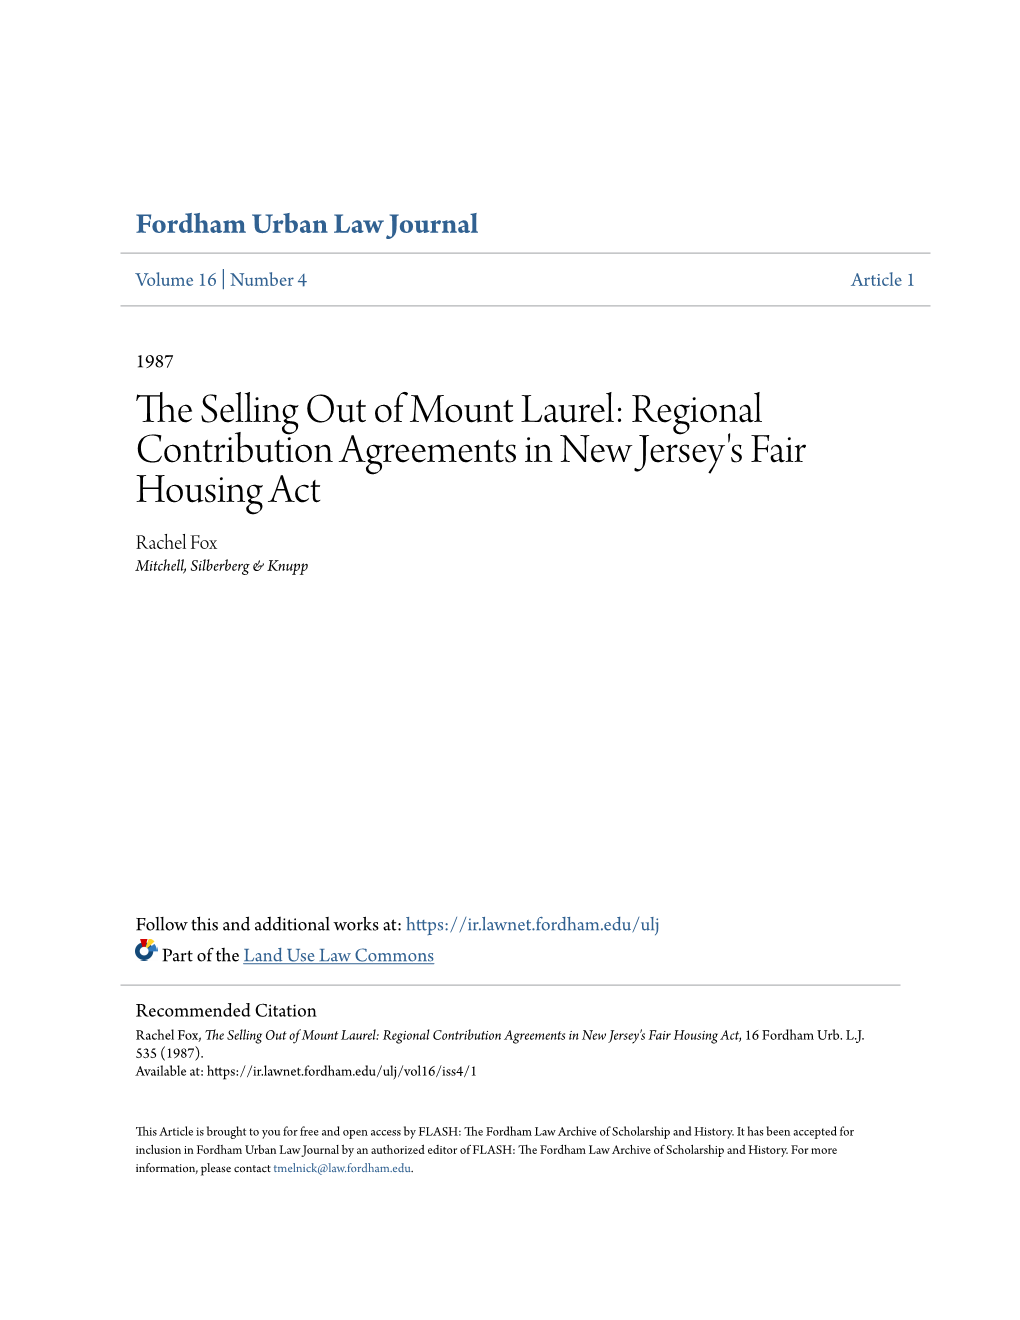 The Selling out of Mount Laurel: Regional Contribution Agreements in New Jersey's Fair Housing Act, 16 Fordham Urb